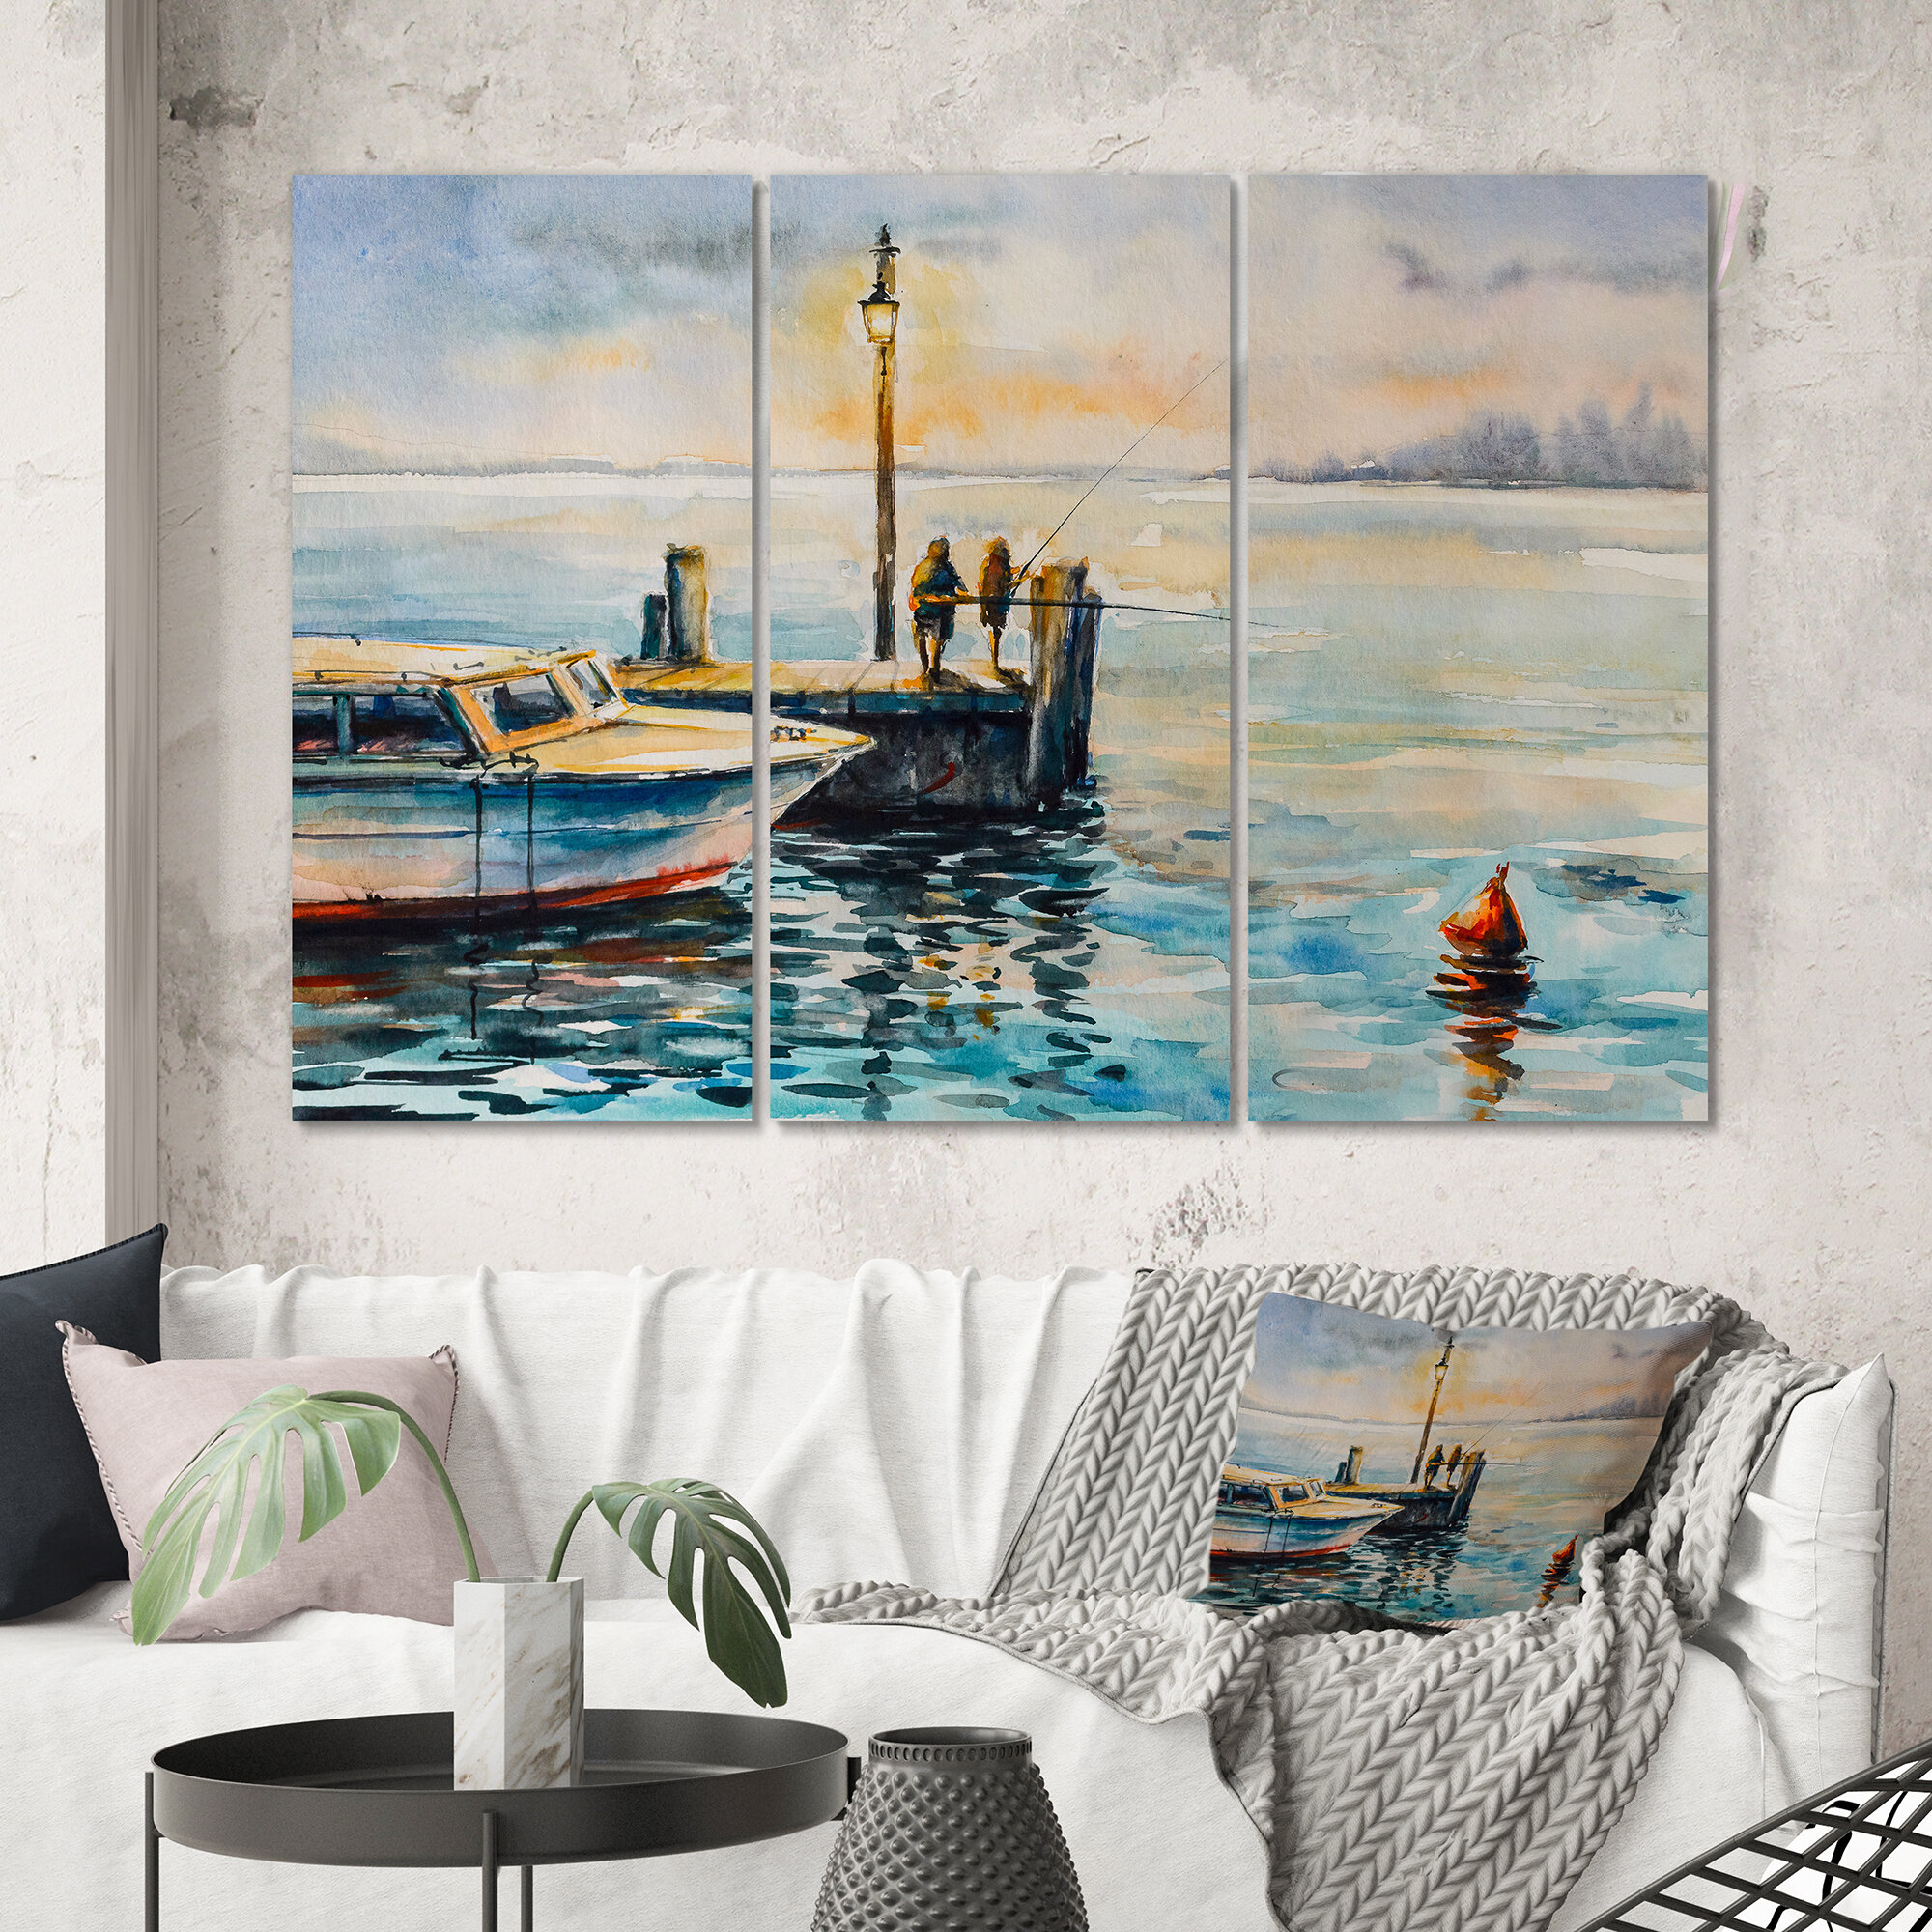 Bless international Two Men Fishing At Dusk At The Pier On Canvas 3 Pieces  Painting